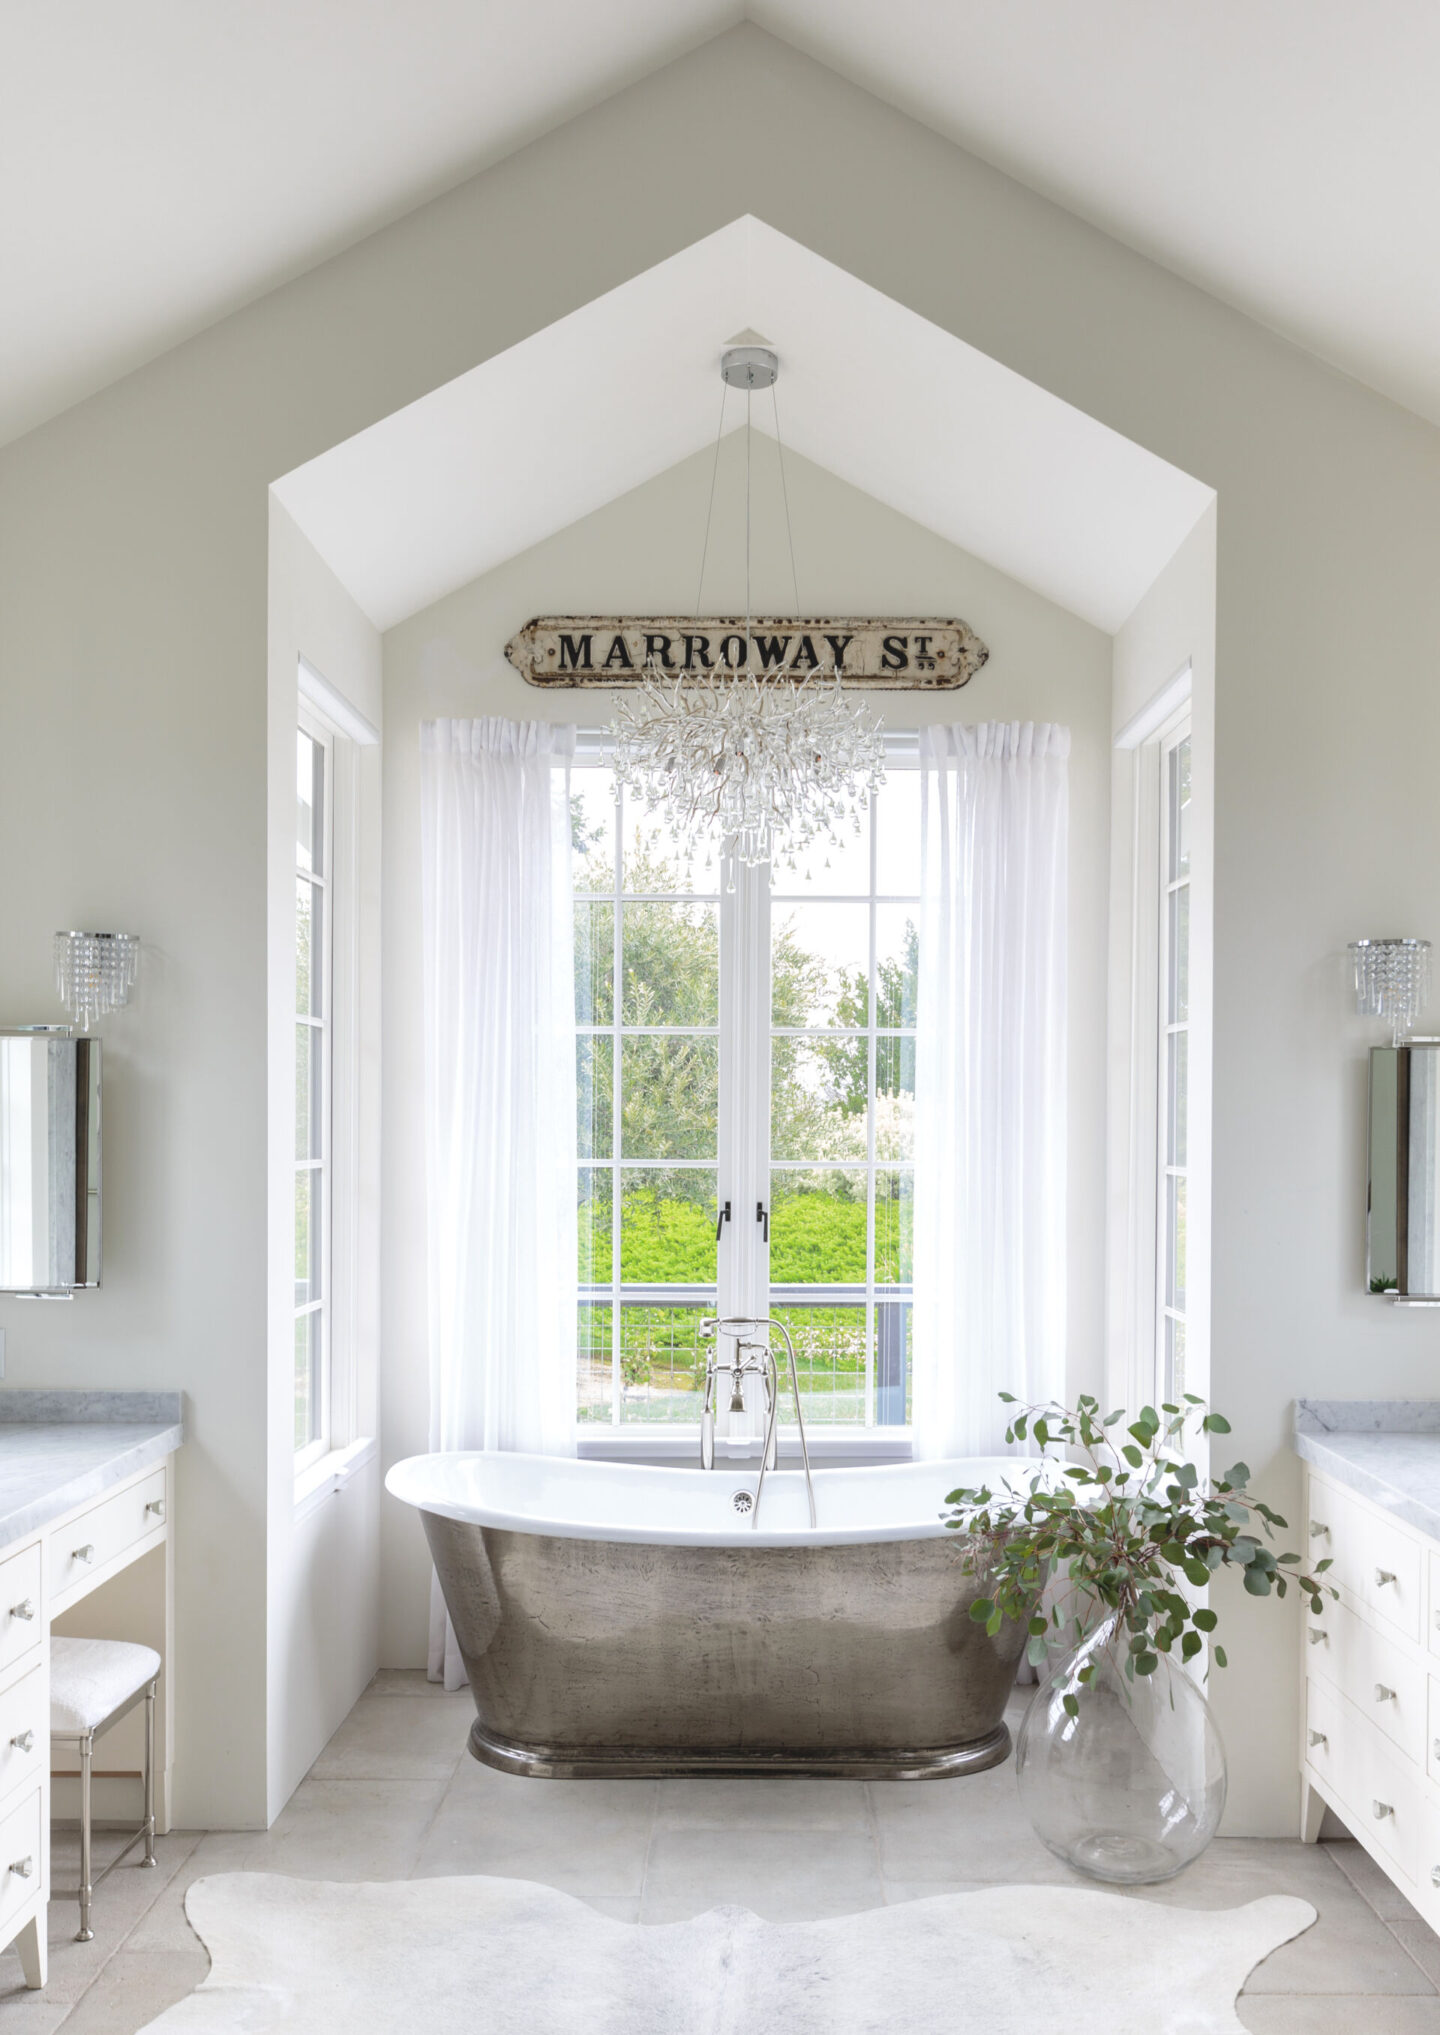 Luxurious white bath with soaking tub and serene decor - from Fifi O'Neill's SHADES OF WHITE (CICO Books, 2021). #fifioneill